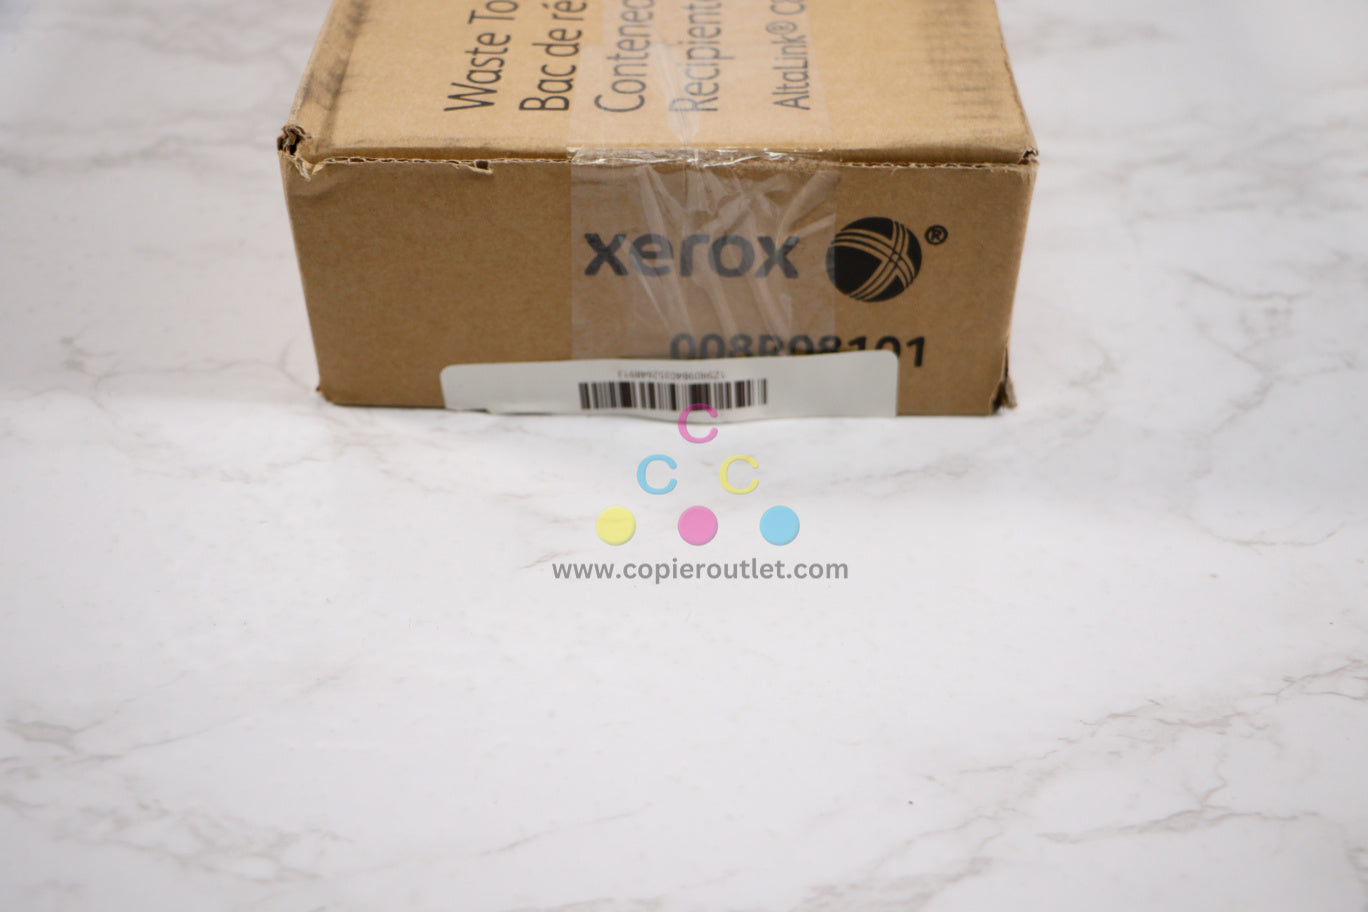 New OEM Xerox AltaLink B8145, B8155, B8170 Waste Toner Container 008R08101